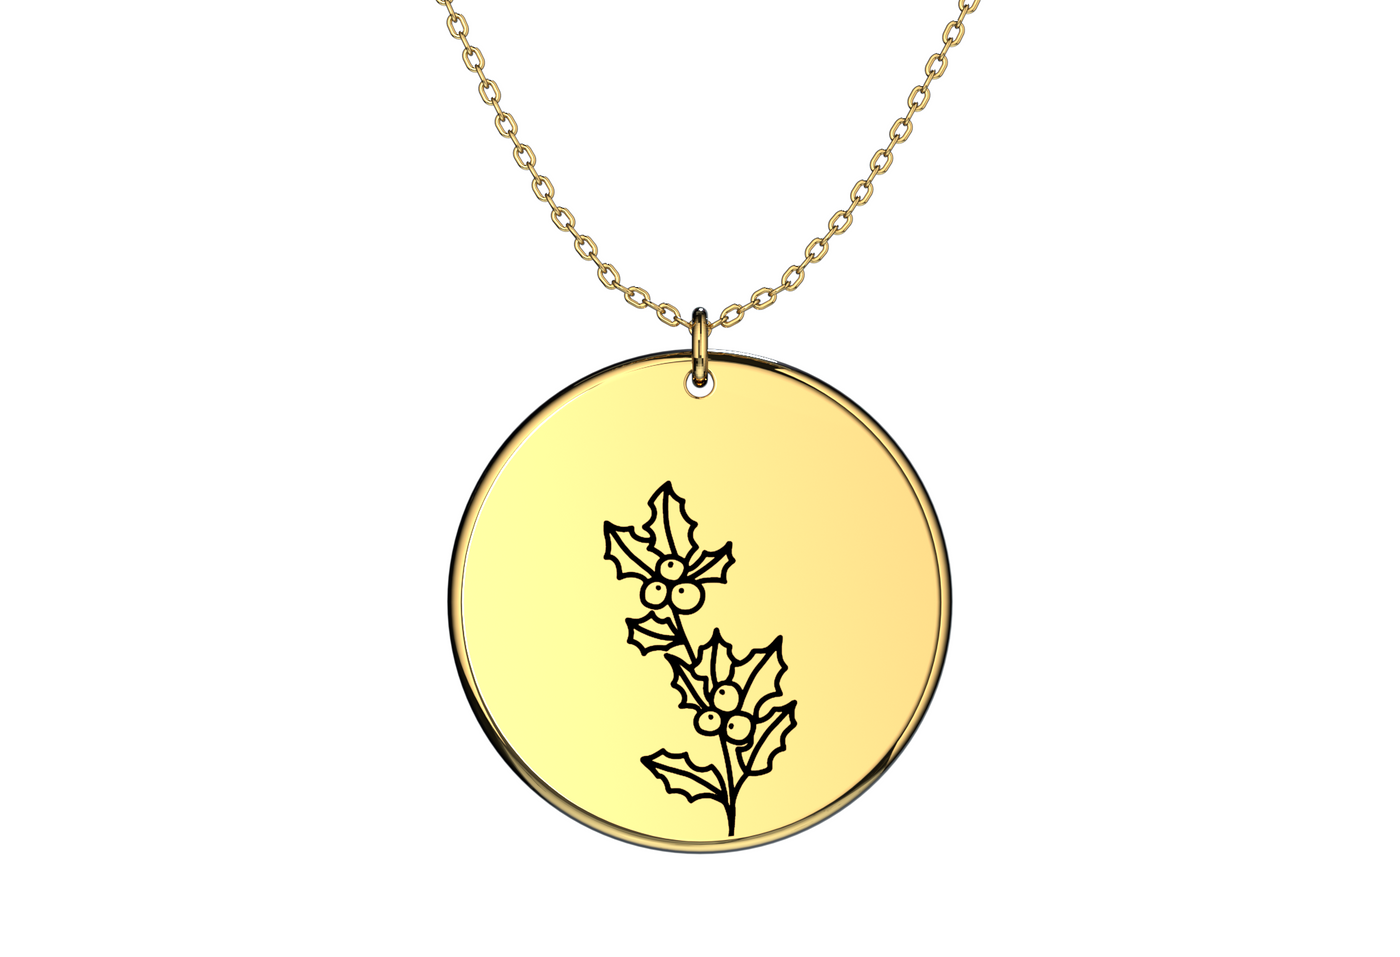 Your Birth Flower - Coin Necklace